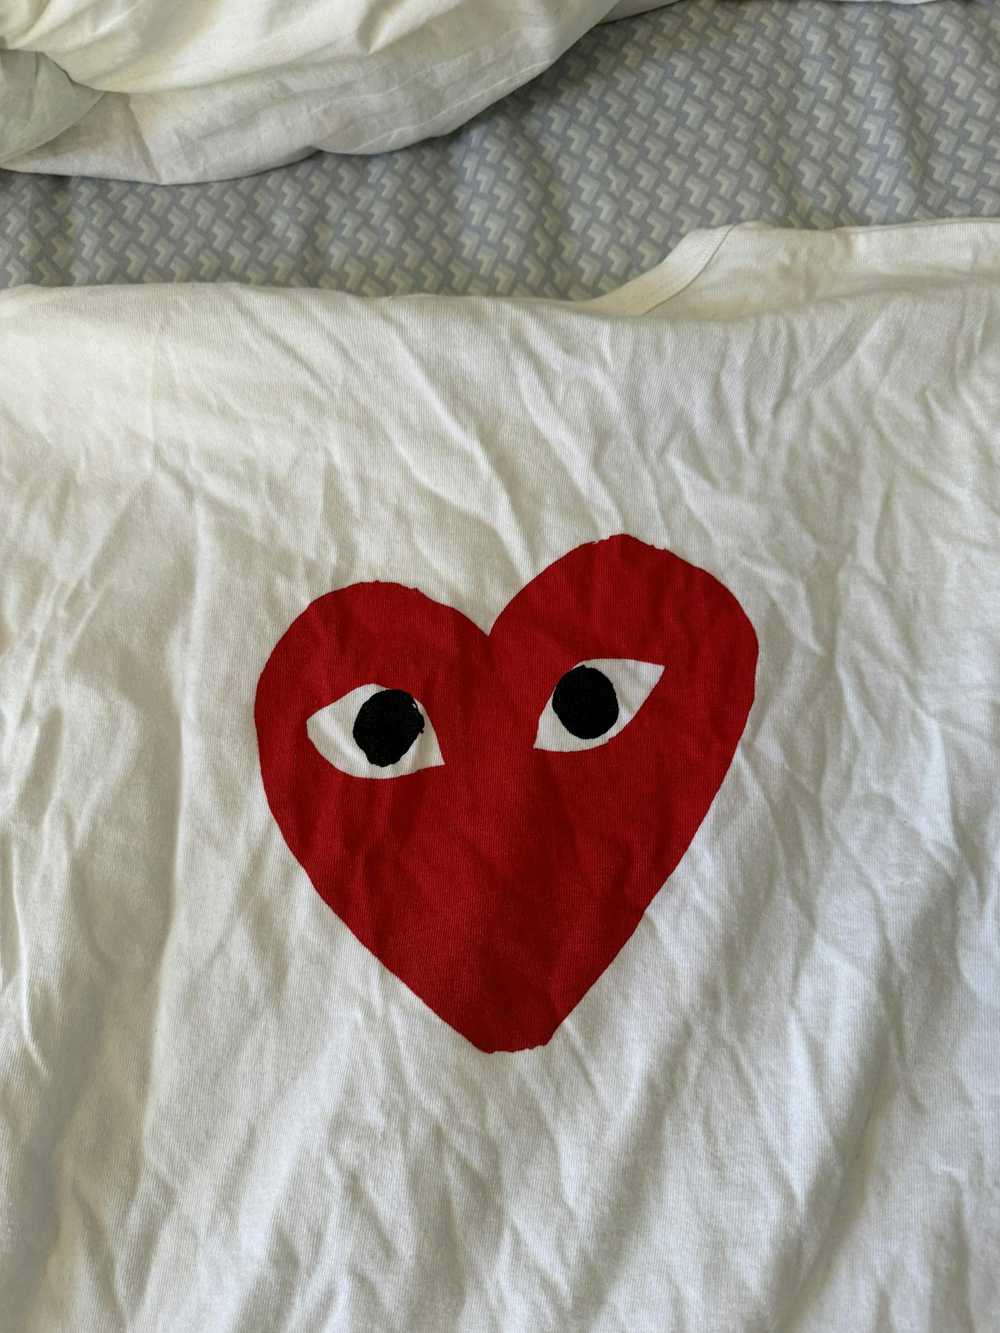 Comme des Garcons CDG Heart White Tee - image 7